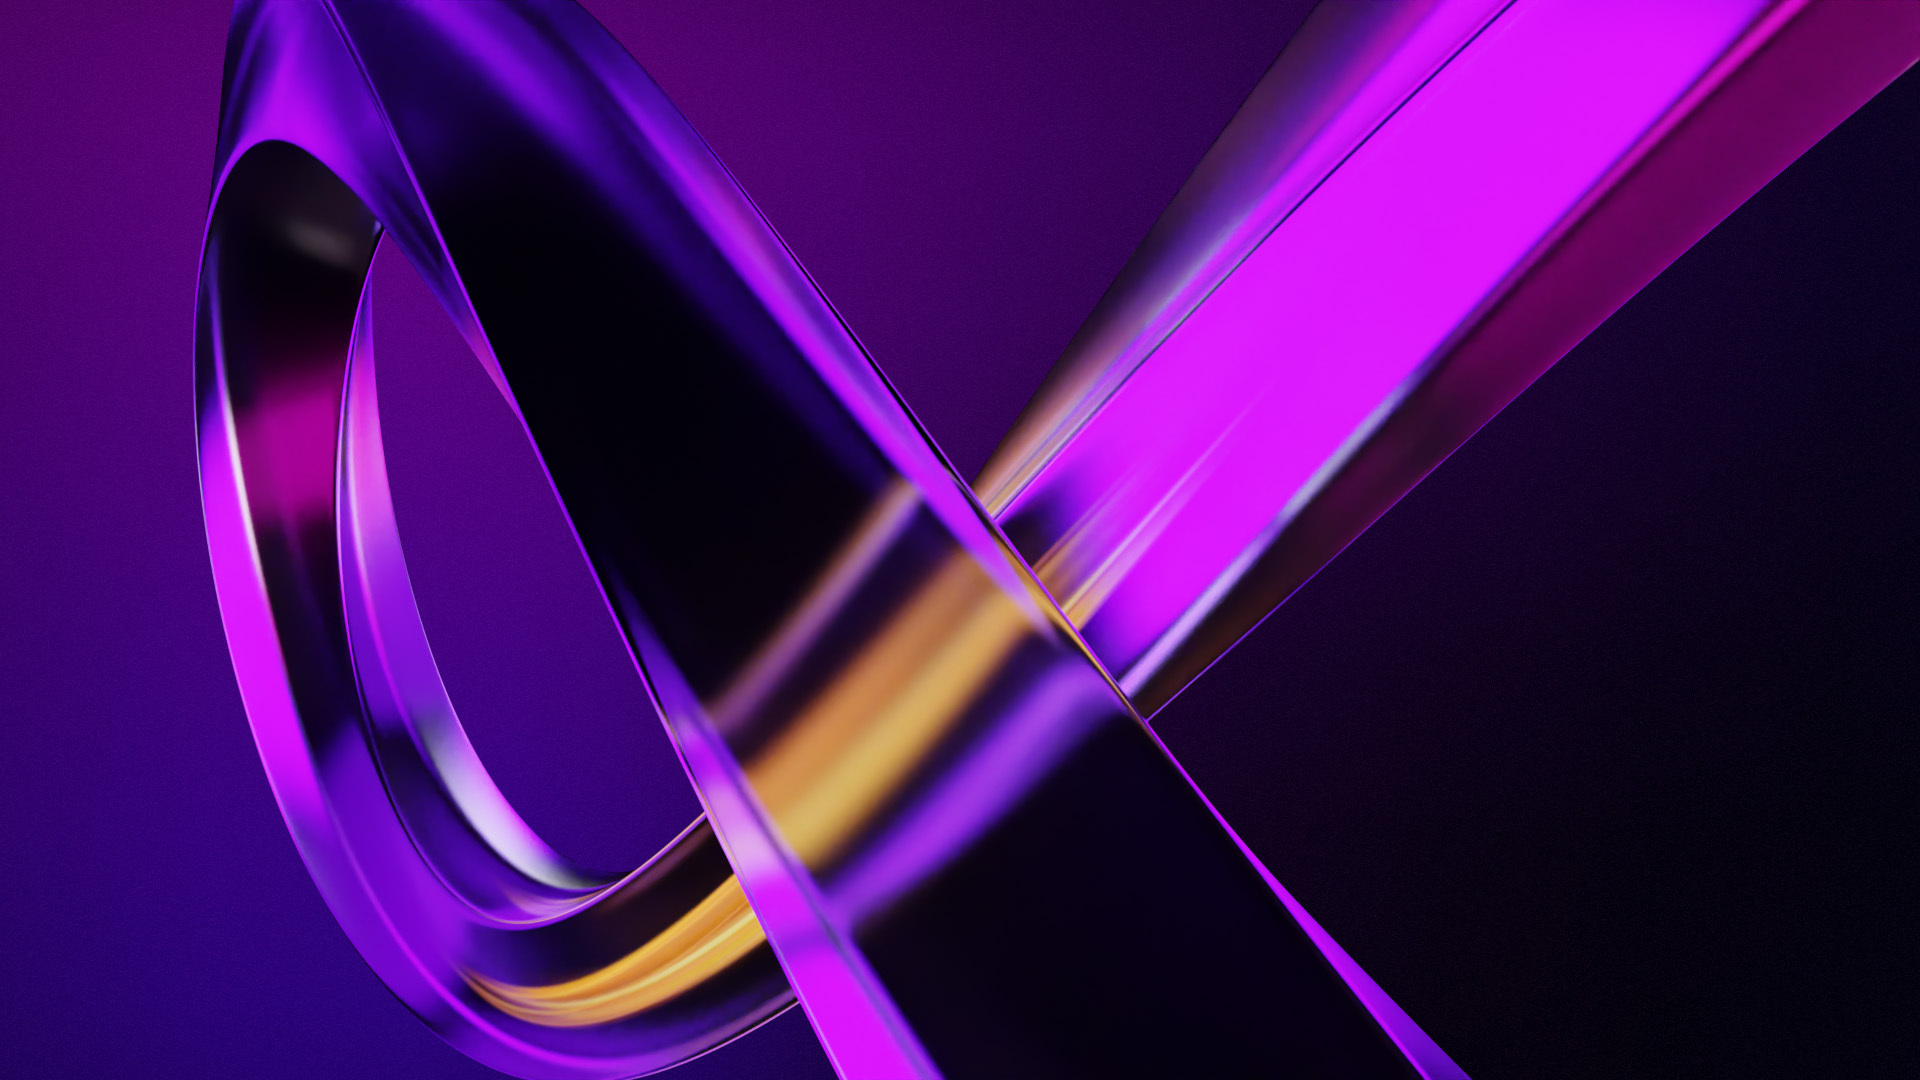 Part of infinity loop with a pulse of purple energy.